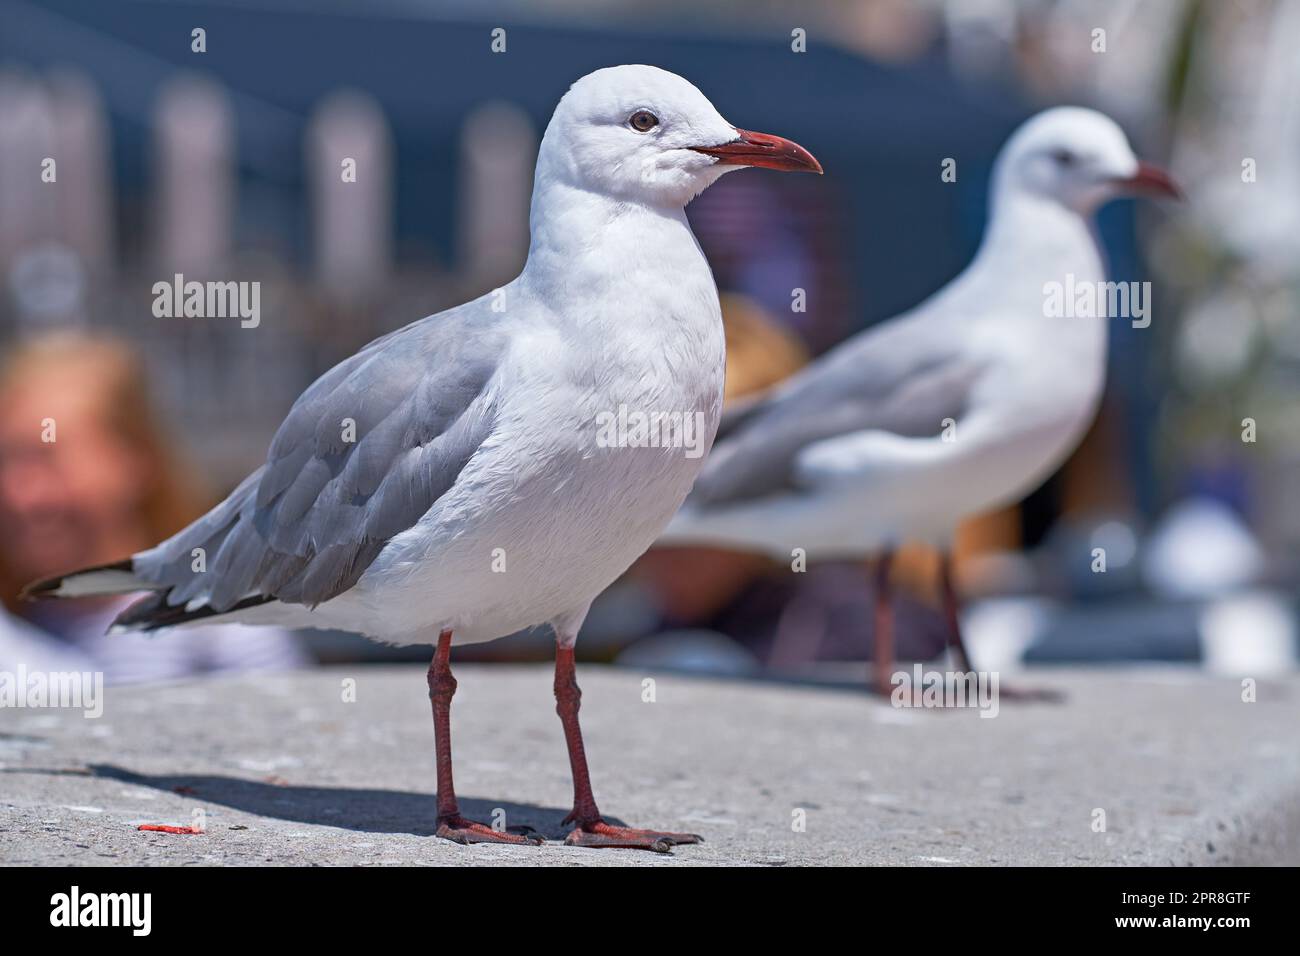 Closeup of two seagulls searching for nesting grounds in a remote coastal city abroad and overseas. Birdwatching curious and mischievous migratory avian wildlife looking for food in a harbour dock Stock Photo